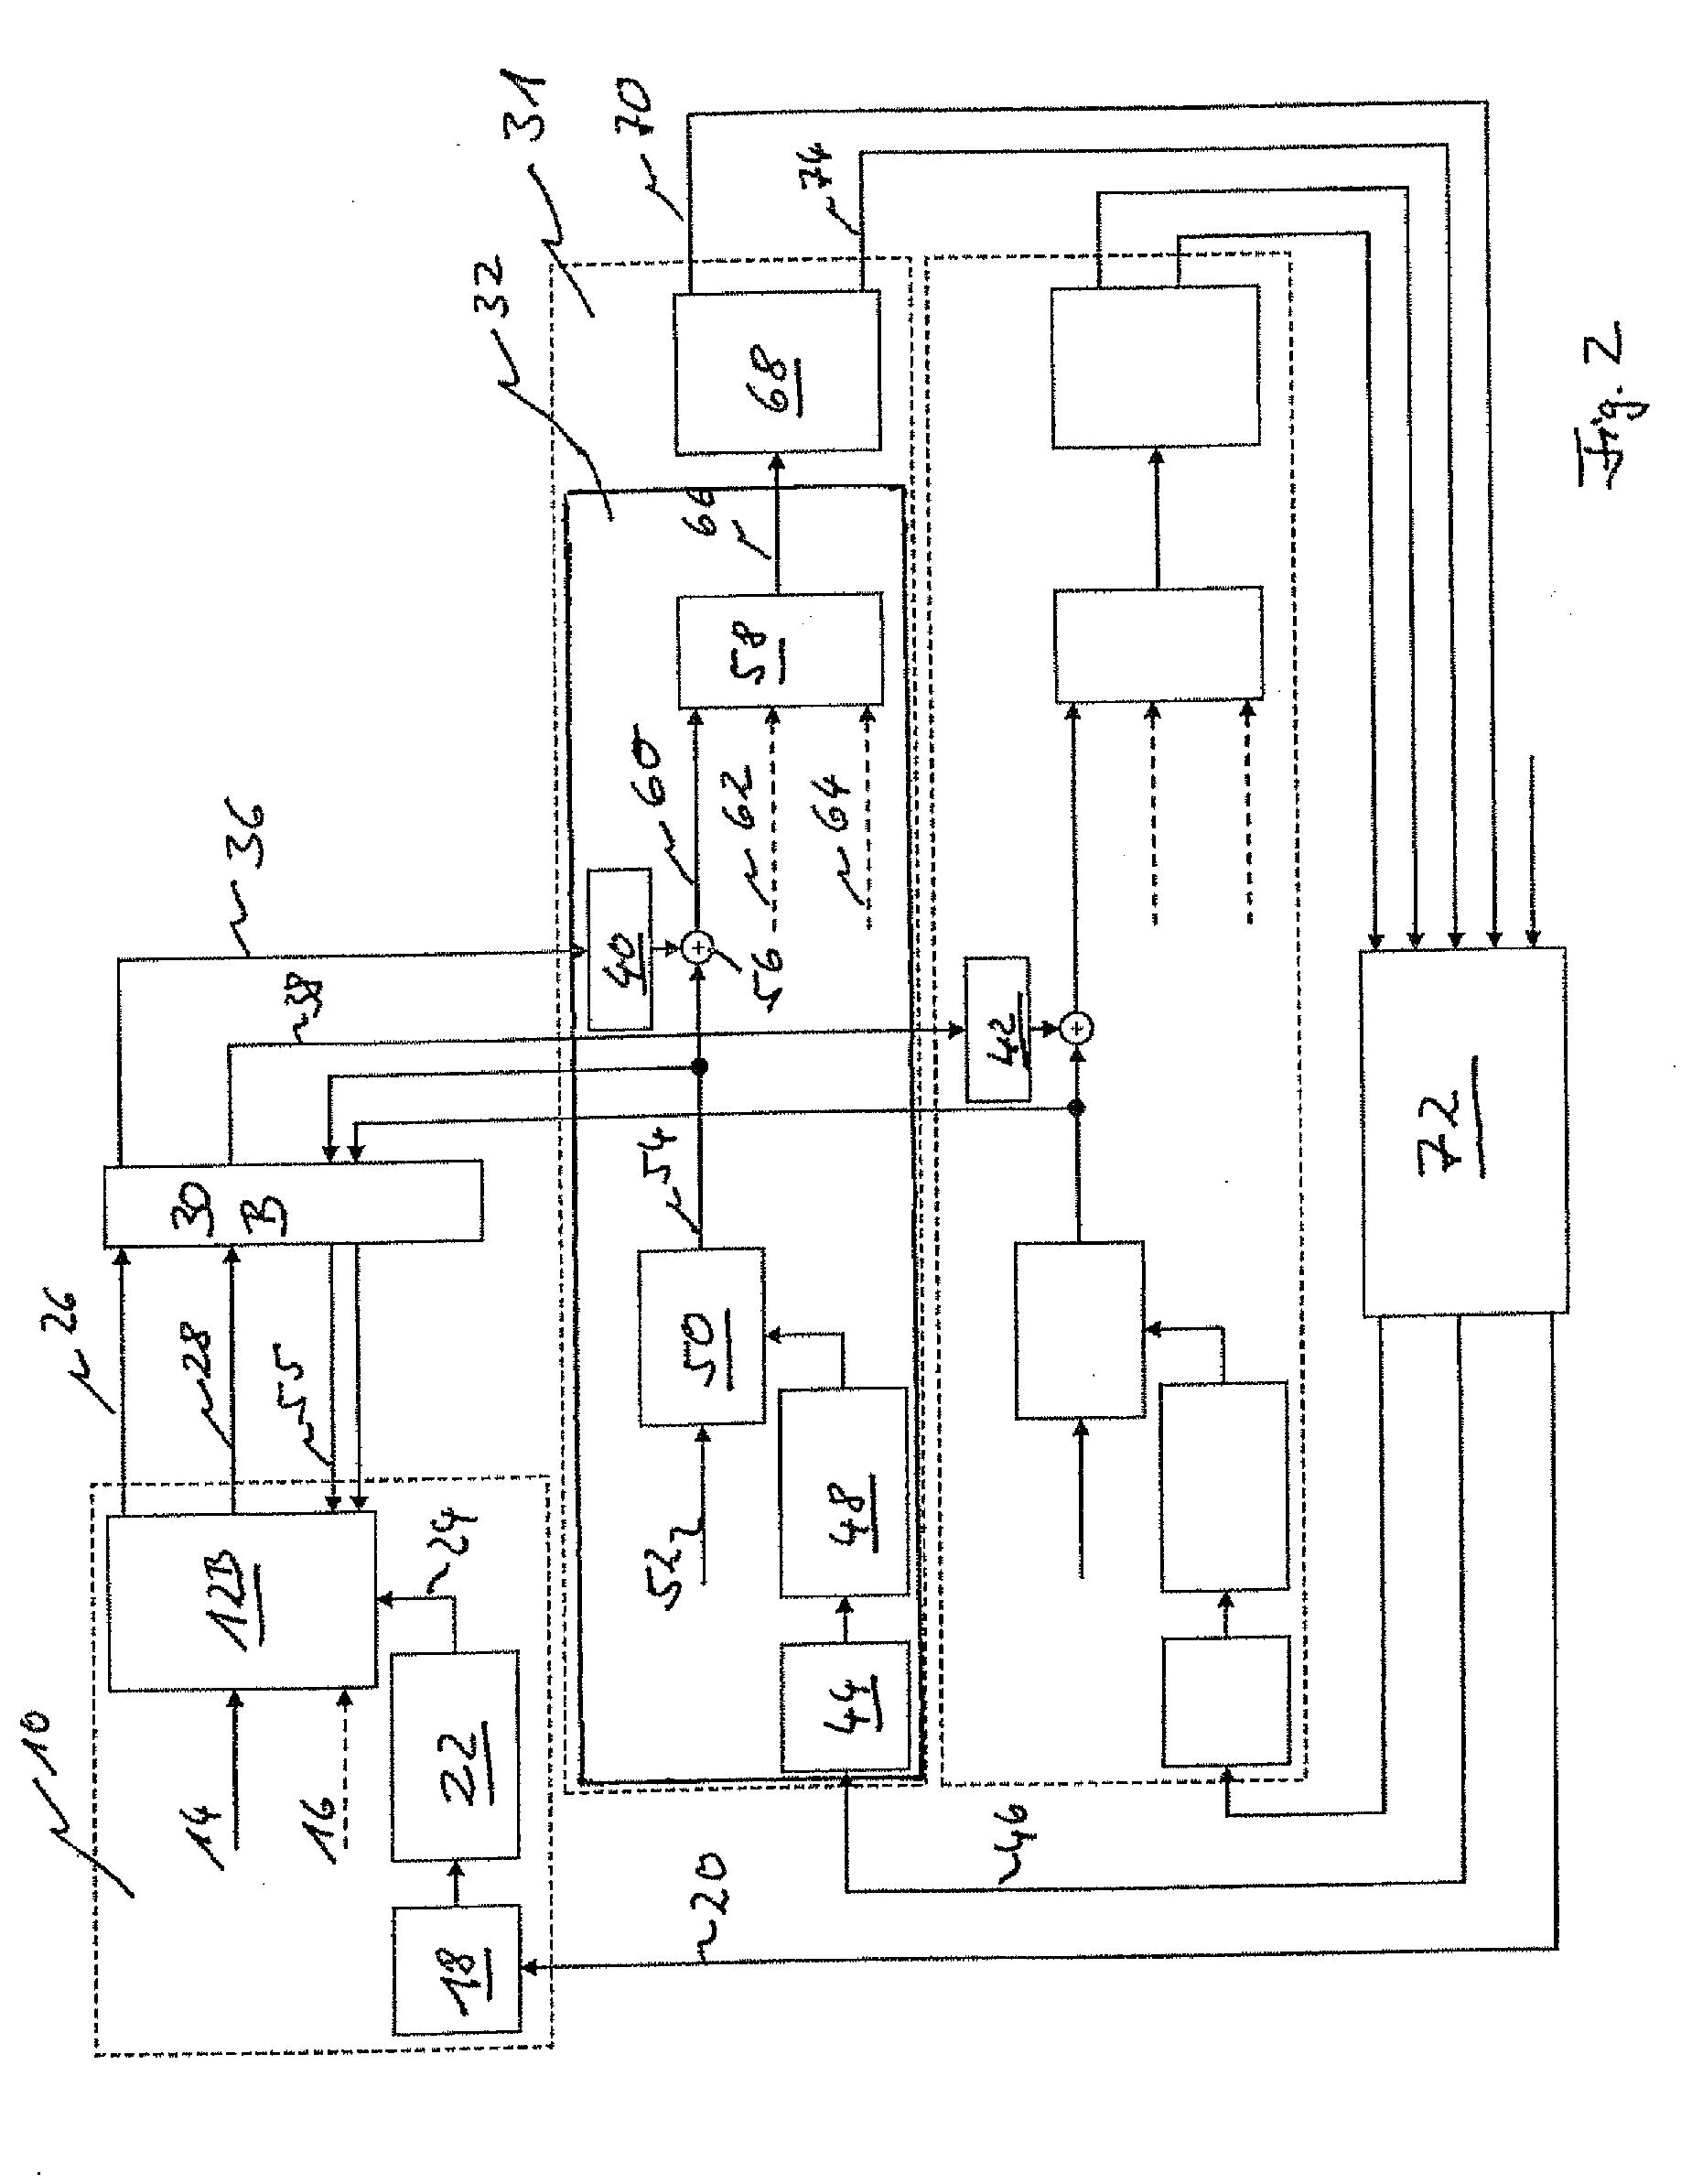 Wind farm with plural wind turbines, and method for regulating the energy feed from a wind farm